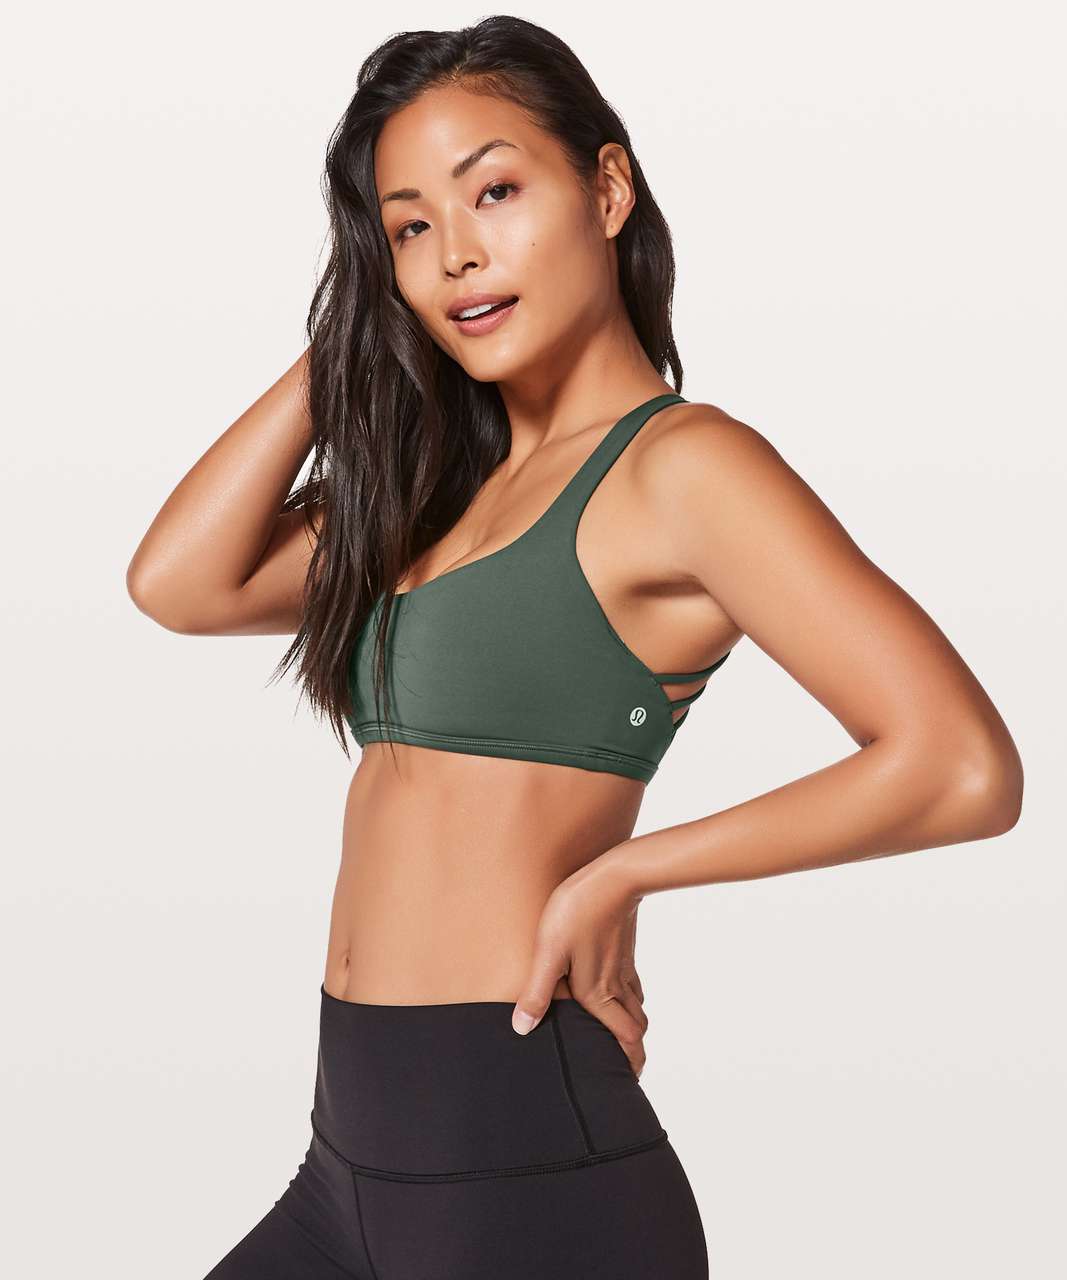 WMTM Score: HN LL Free to Be Wild bra in Rainforest Green, 8 🌲💚 (paired  with Black Crunch WTs, 6) : r/lululemon